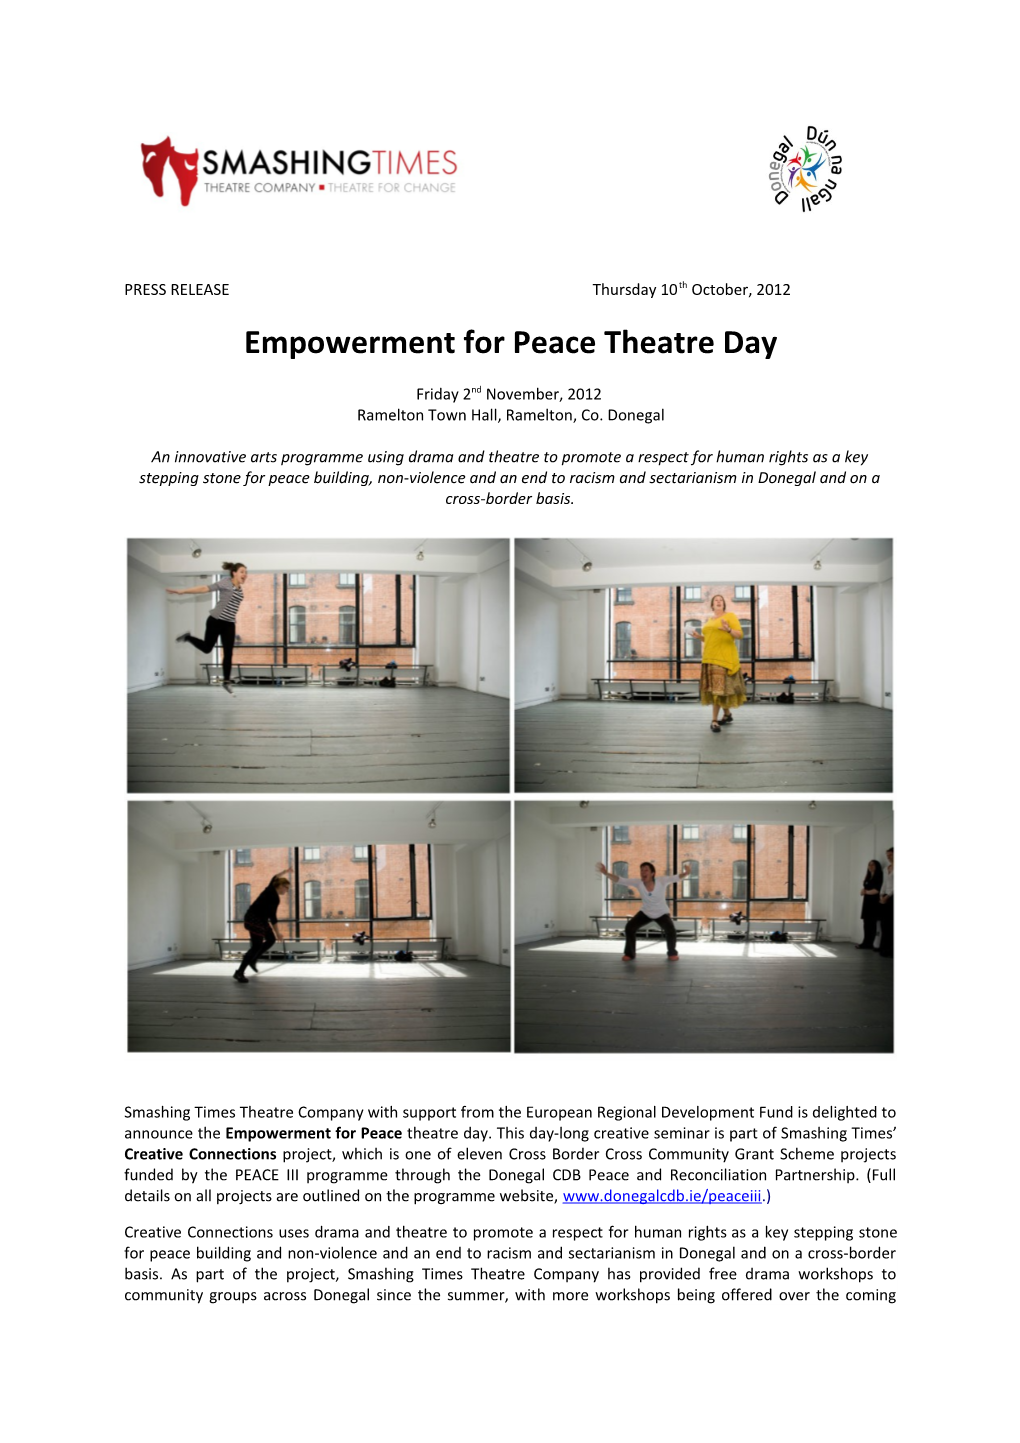 Empowerment for Peace Theatre Day